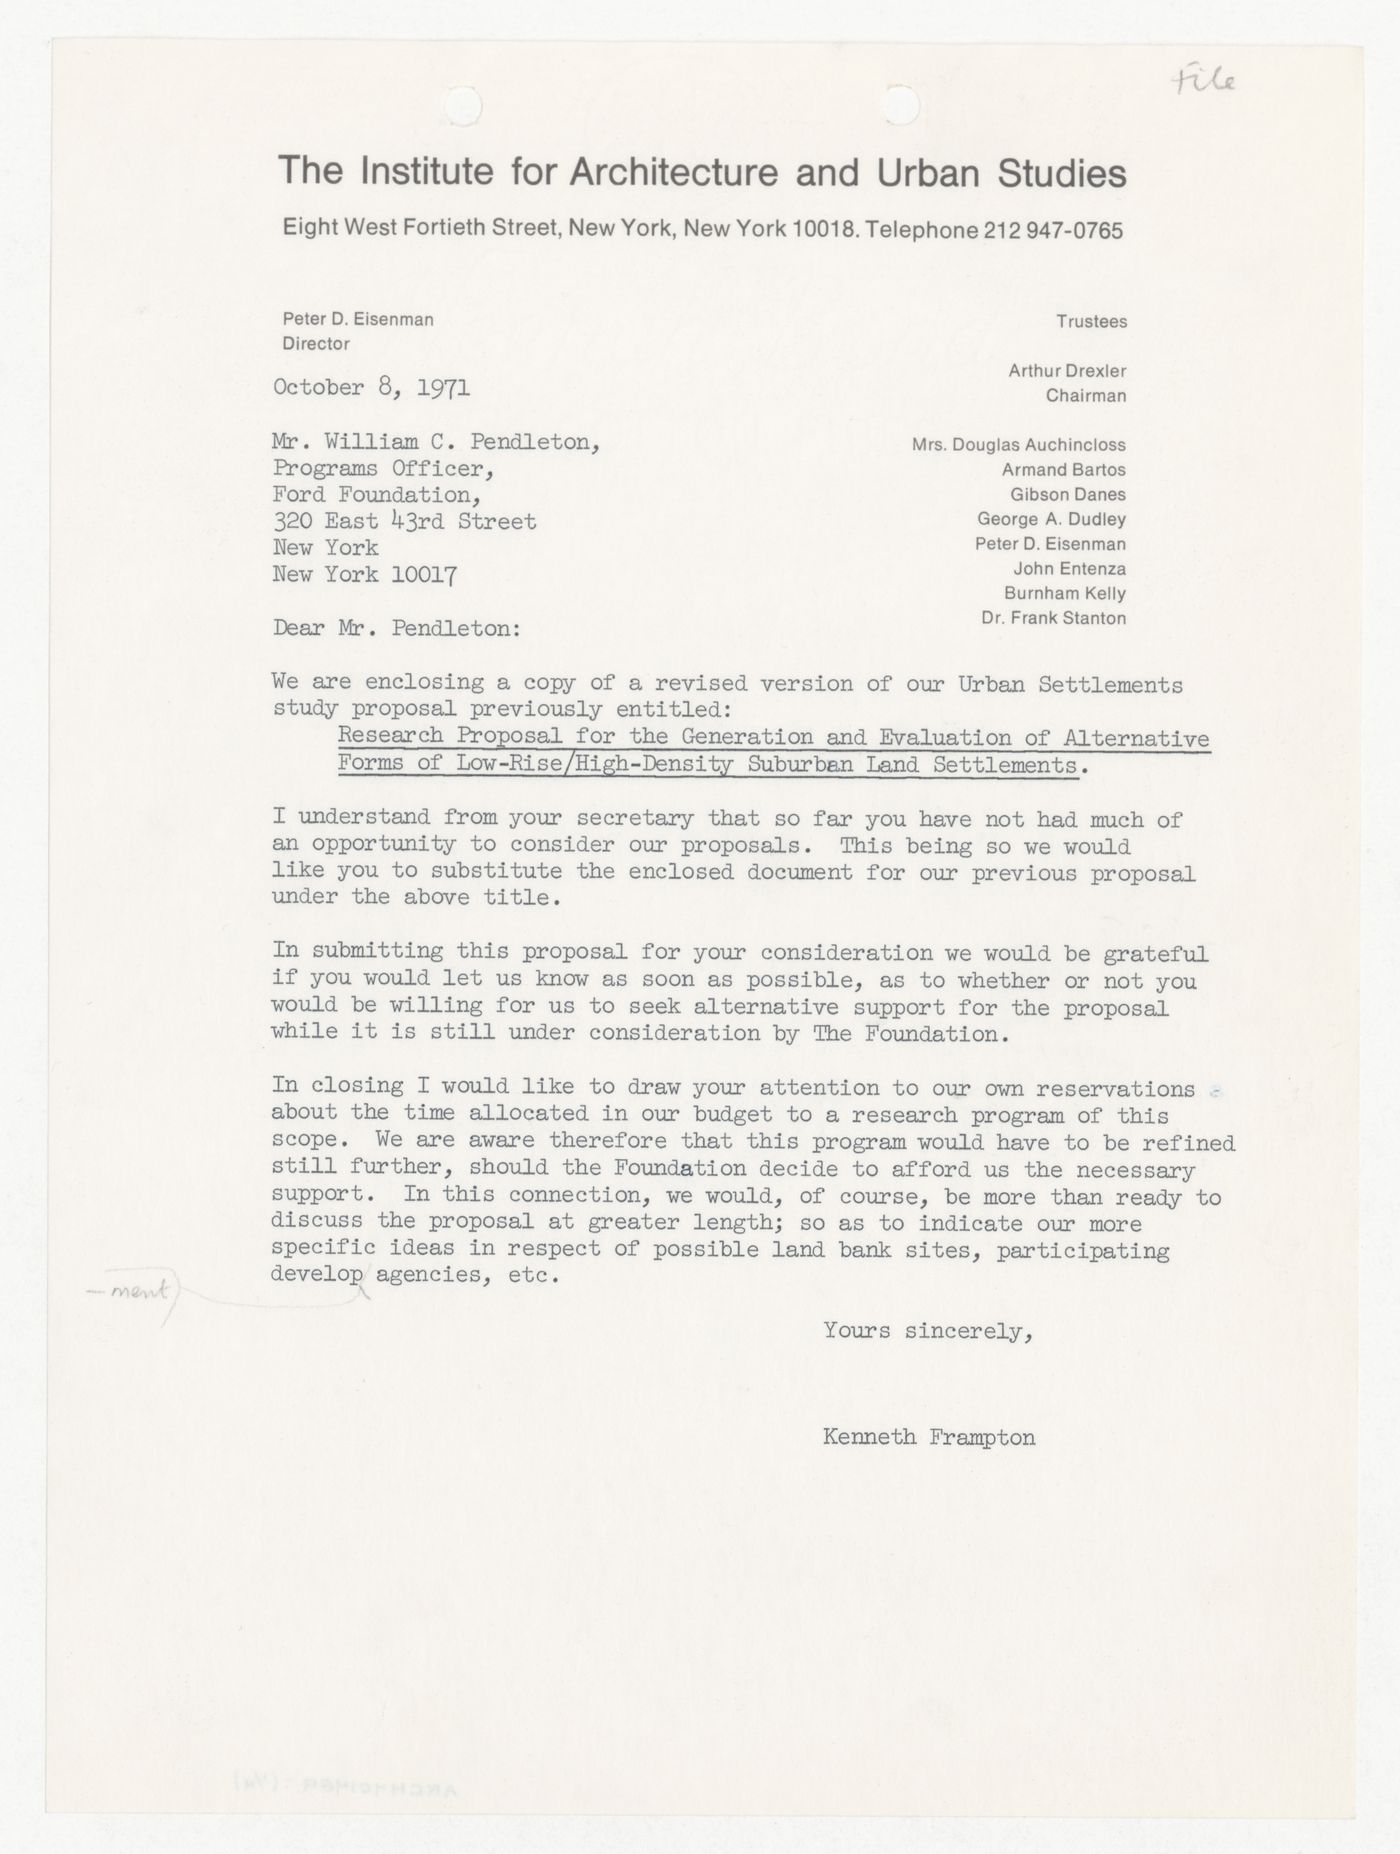 Letter from Kenneth Frampton to William C. Pendleton with attached Proposal for Research into Urban Community Service Facilities